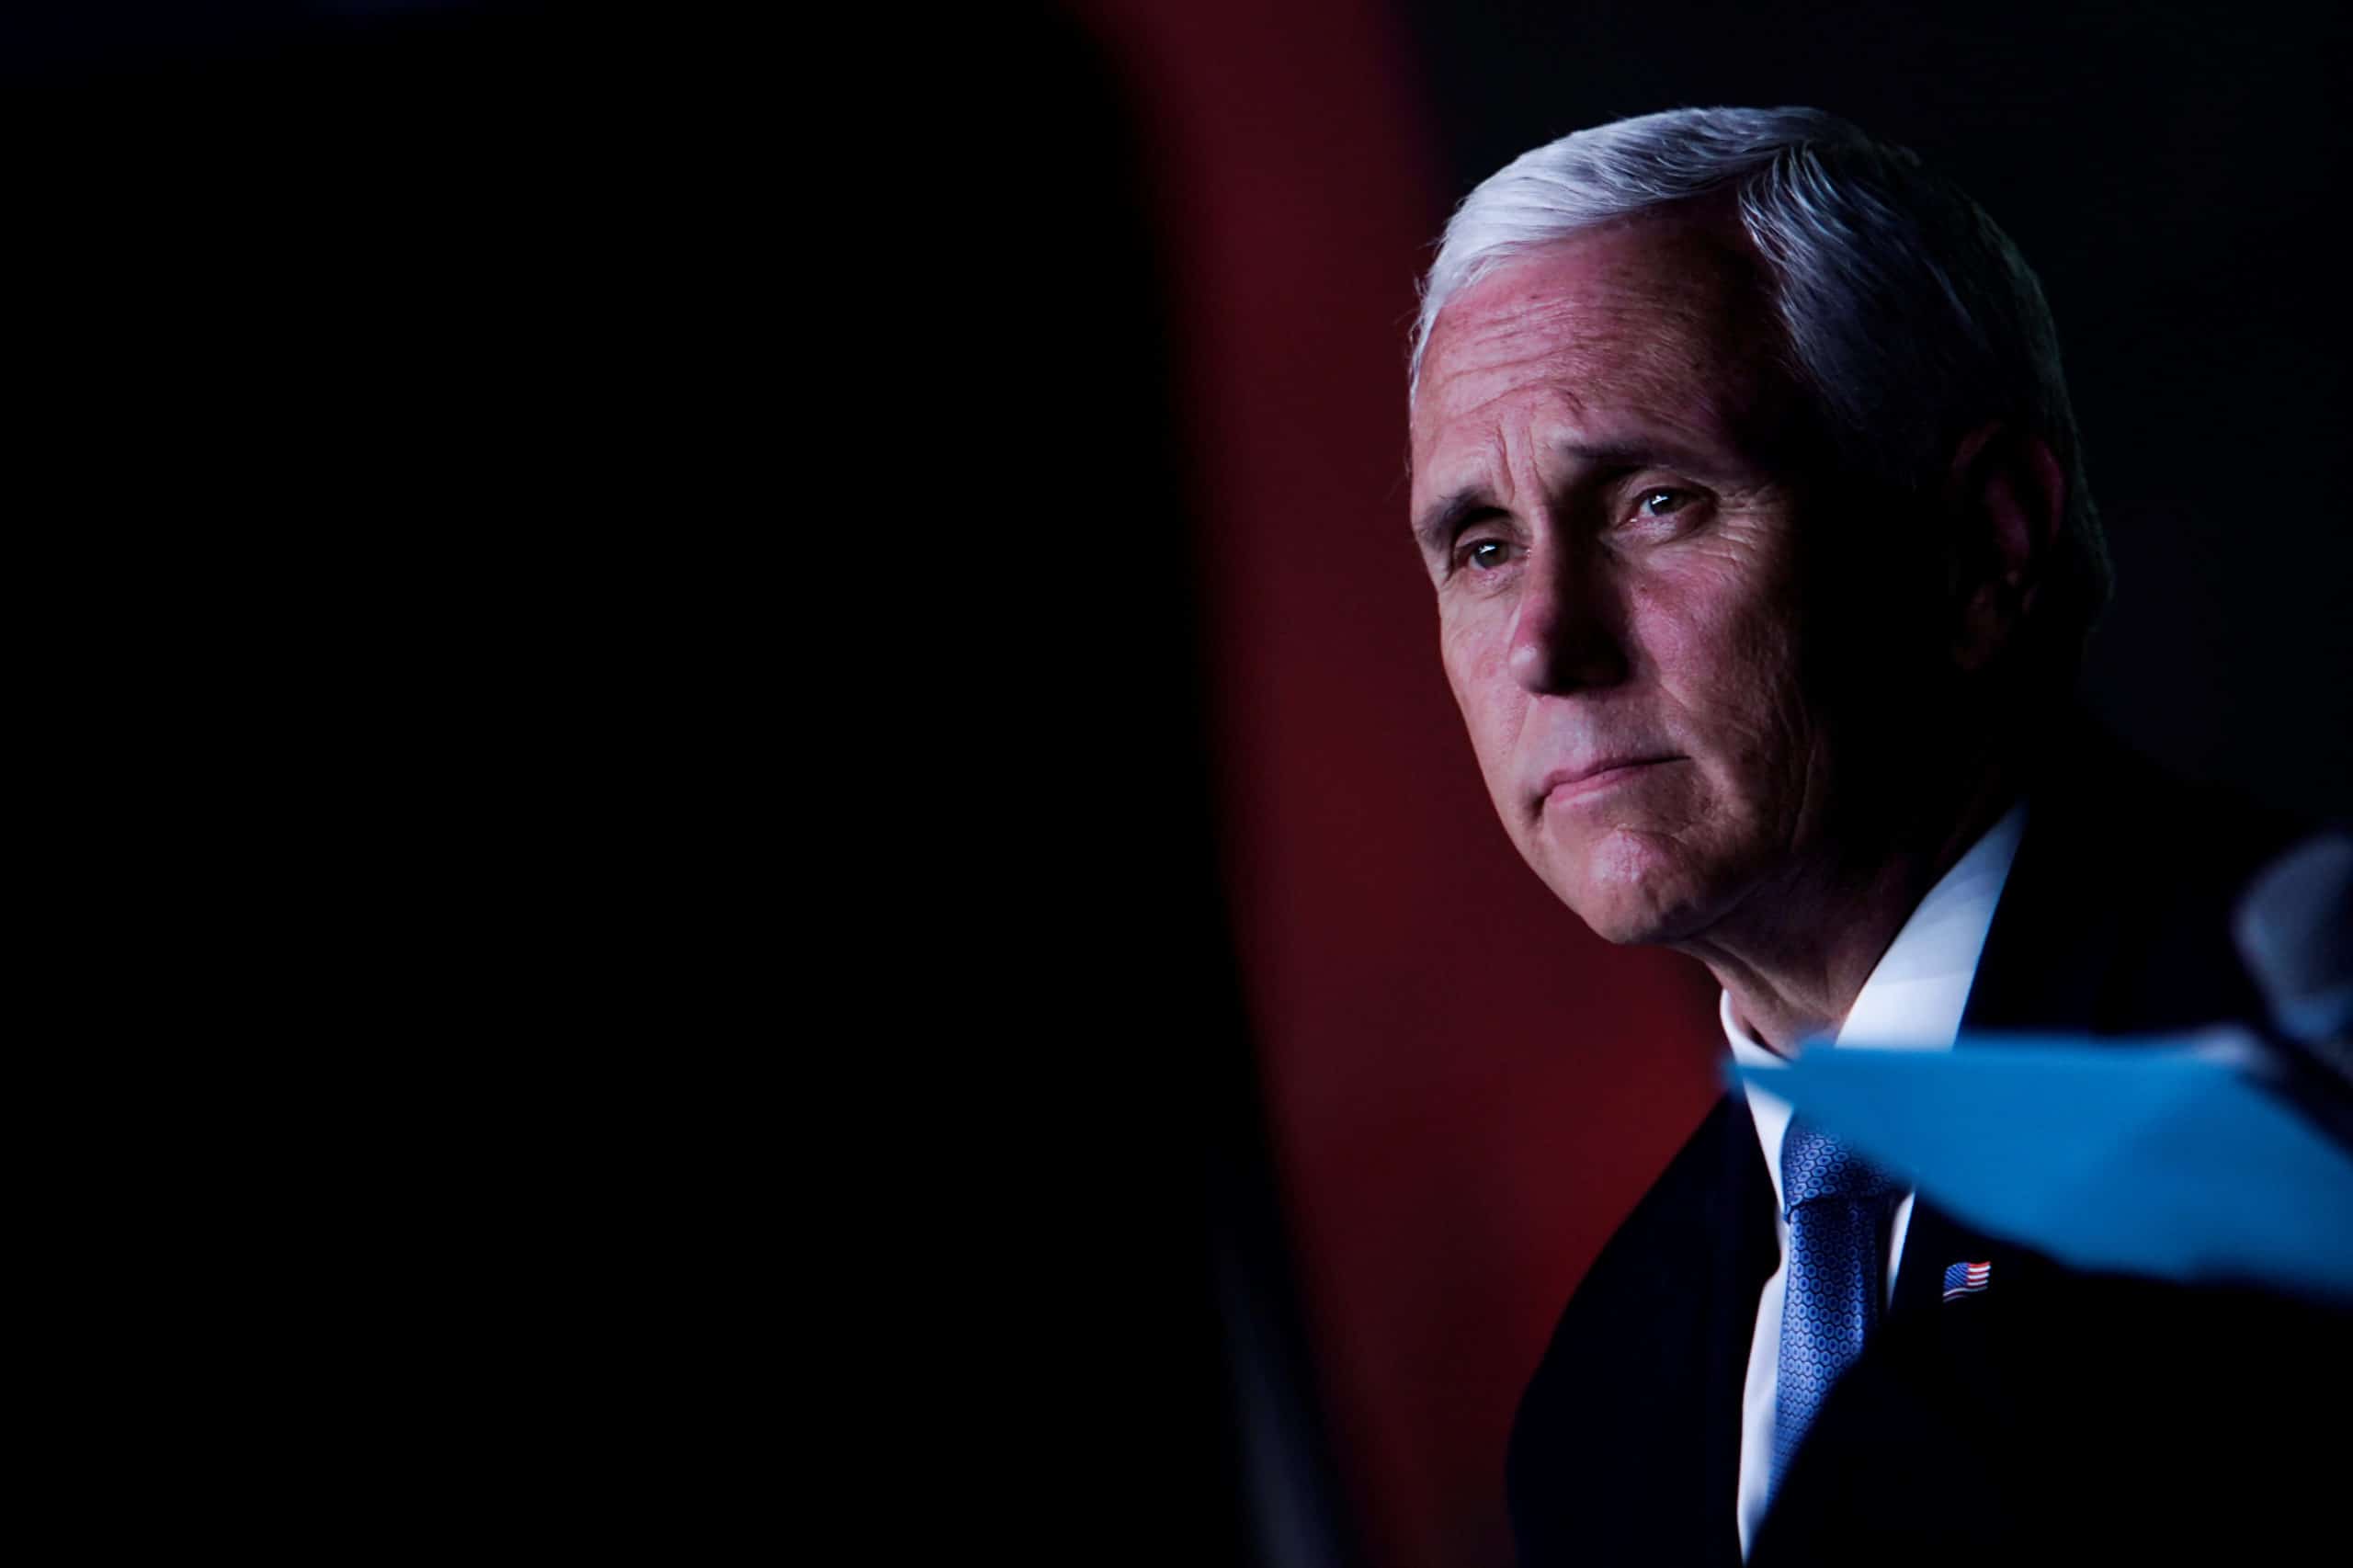 A Dozen Classified Documents Have Been Found At Mike Pence's House